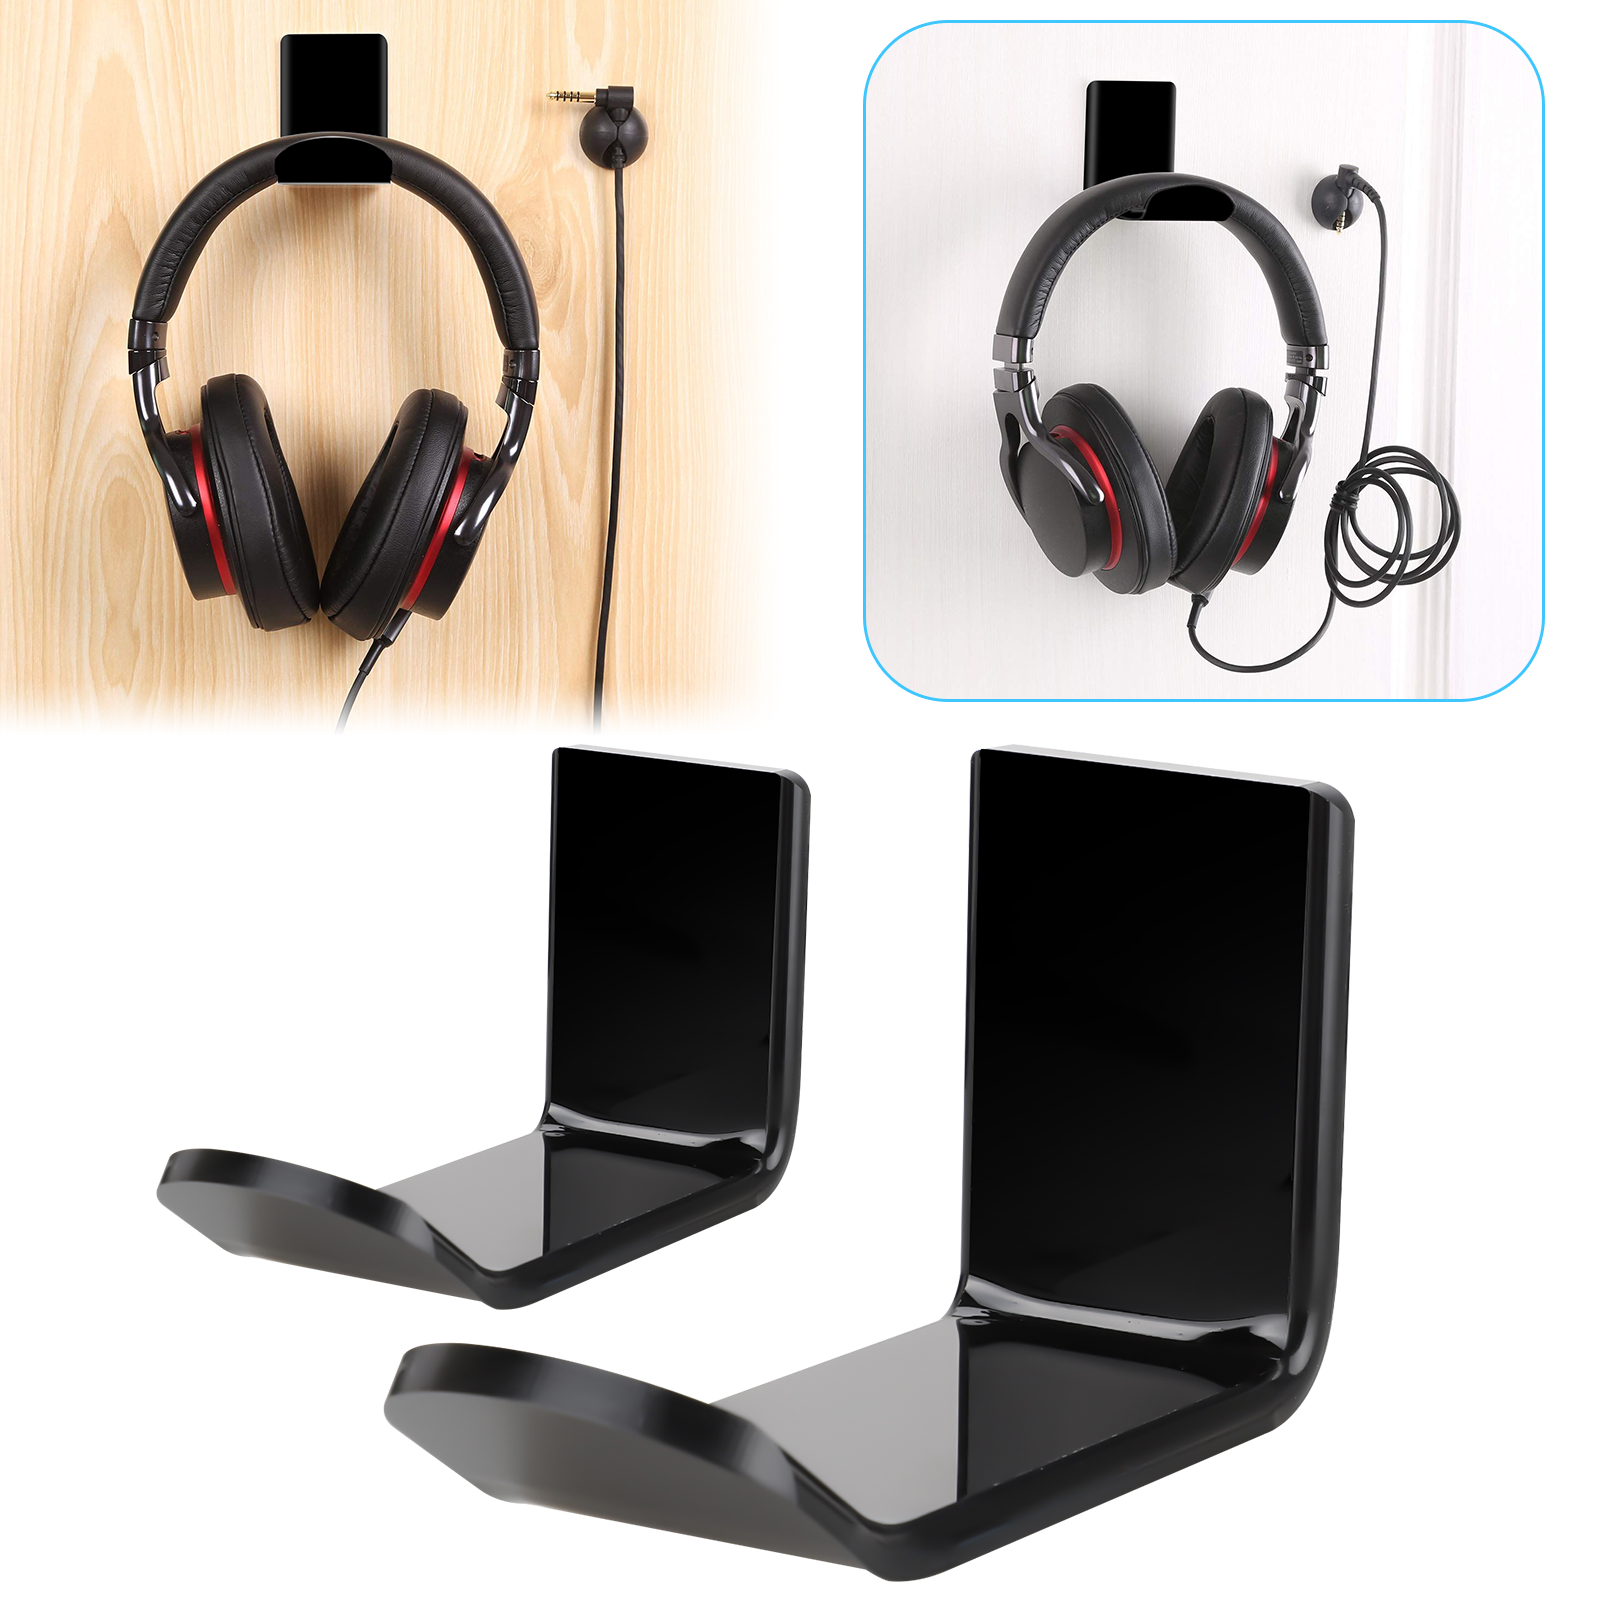 FOLWME Simple Headphone Stand Hanger Hook Tape Under Desk Dual Headset Mount Holder Easy to Use 